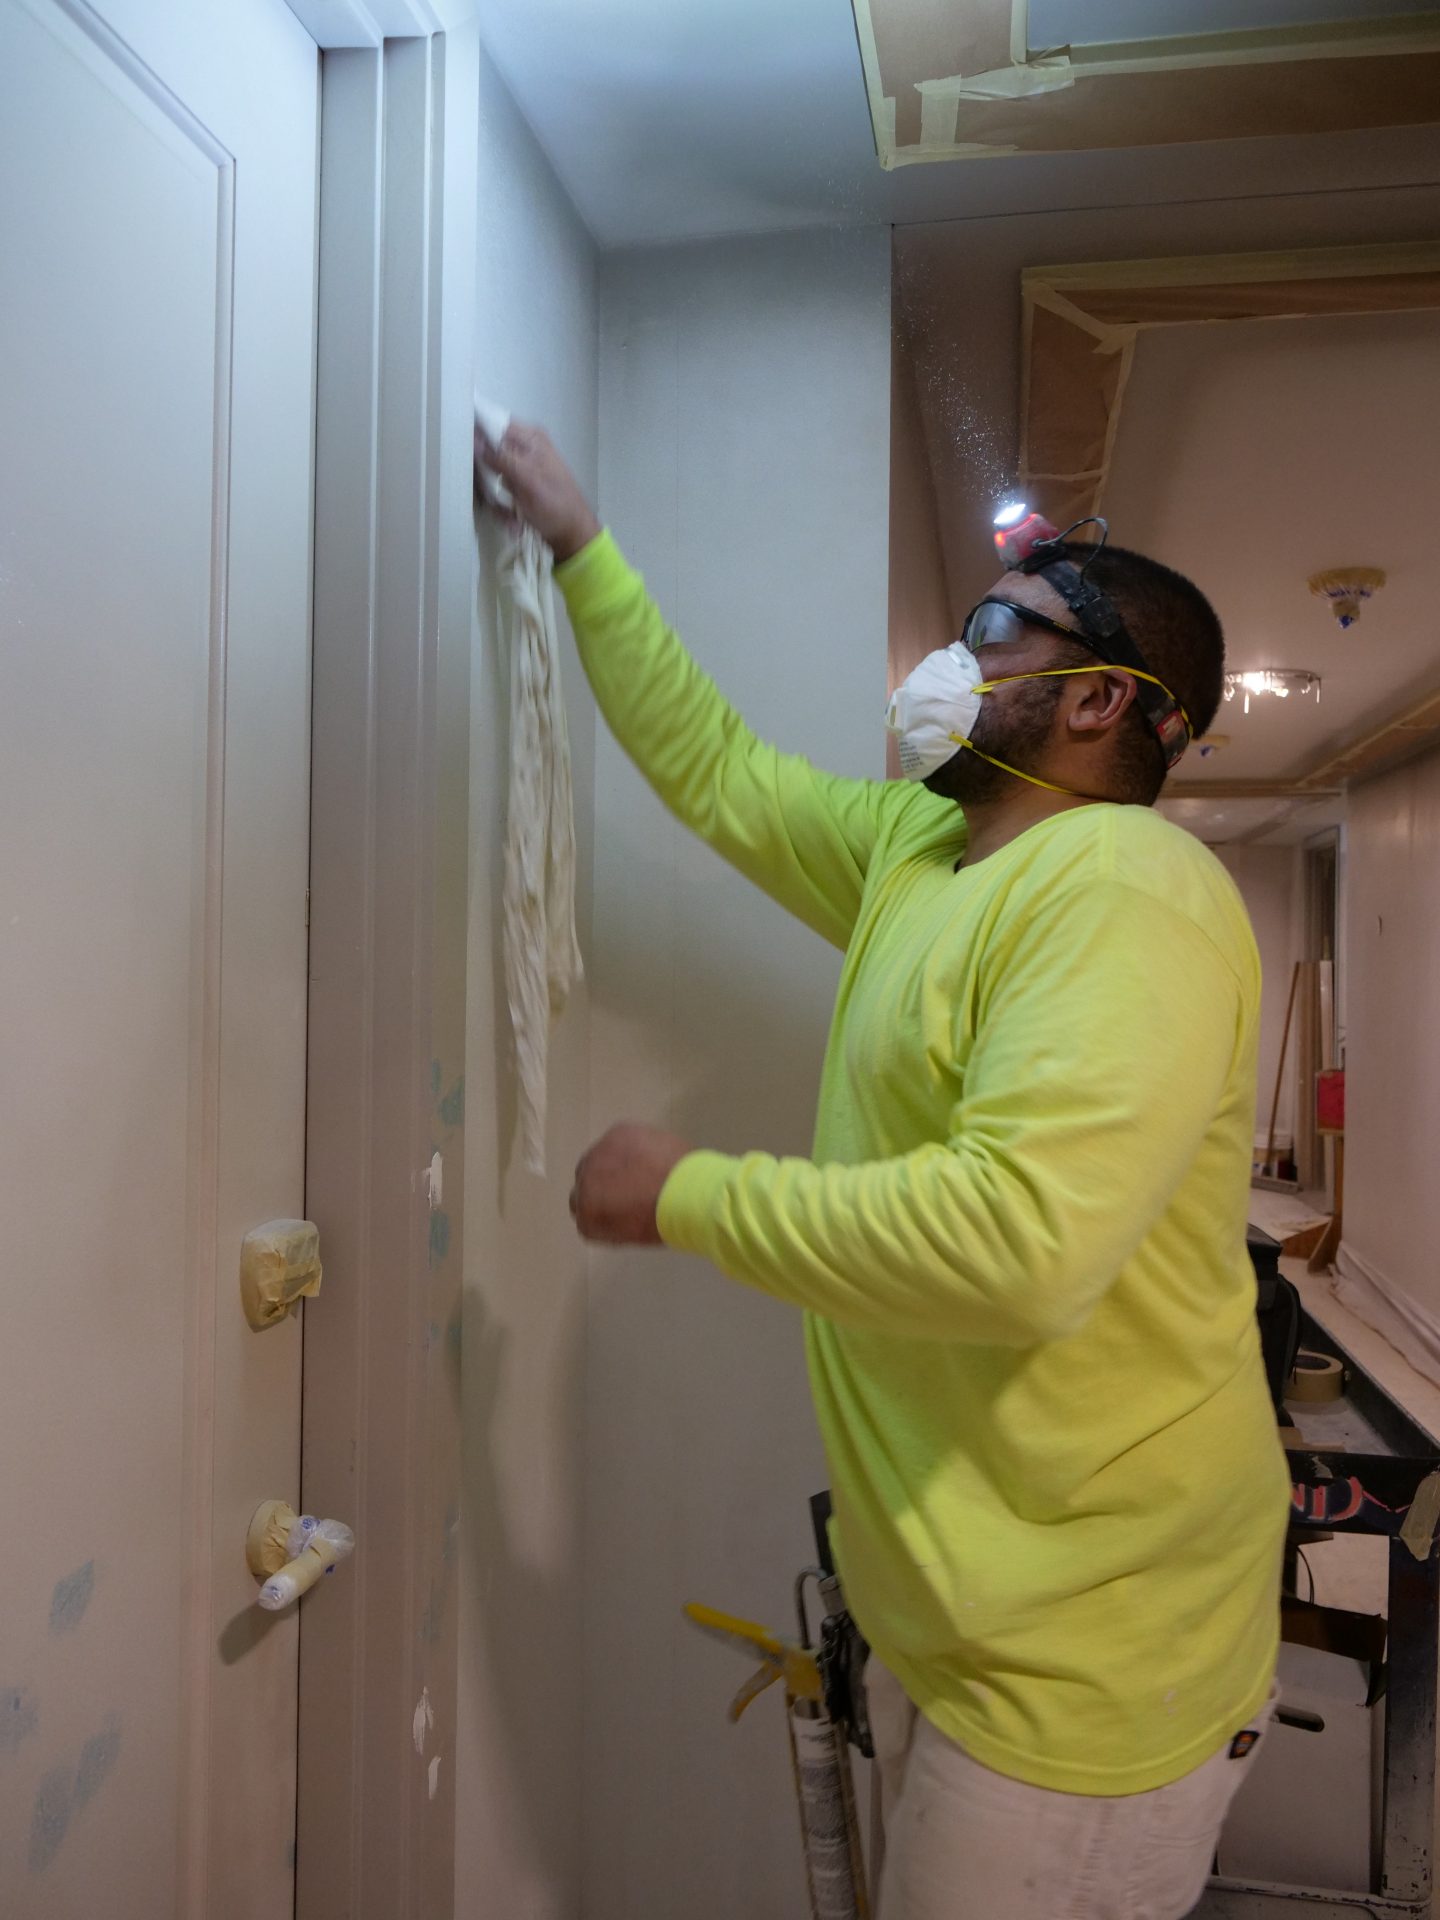 Image from the Gallery: Drywall Finishers 2018